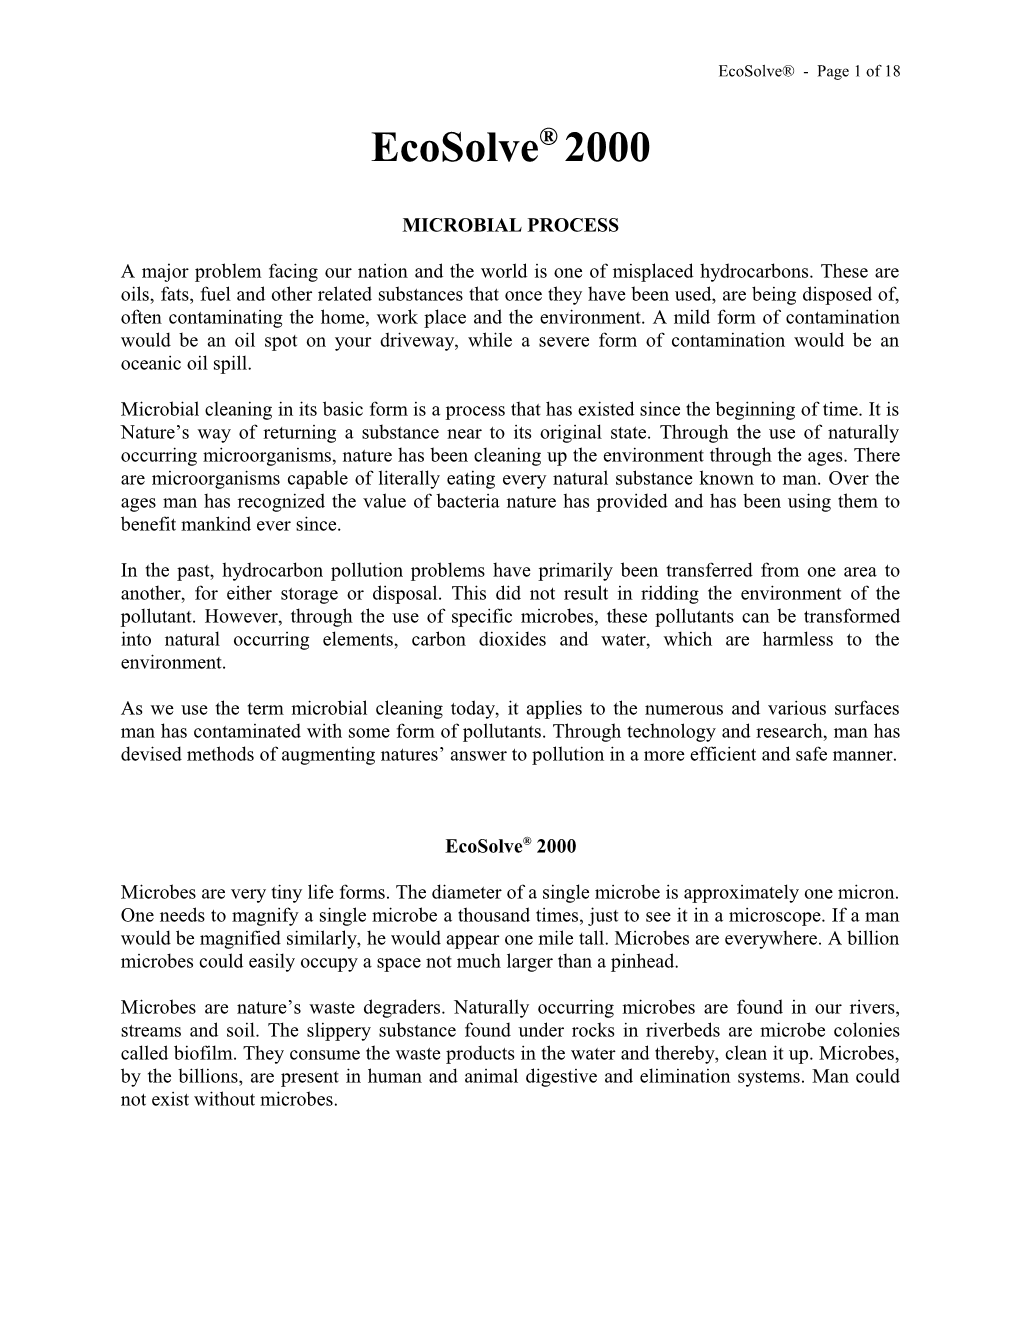 Ecosolve - Page 1 of 18